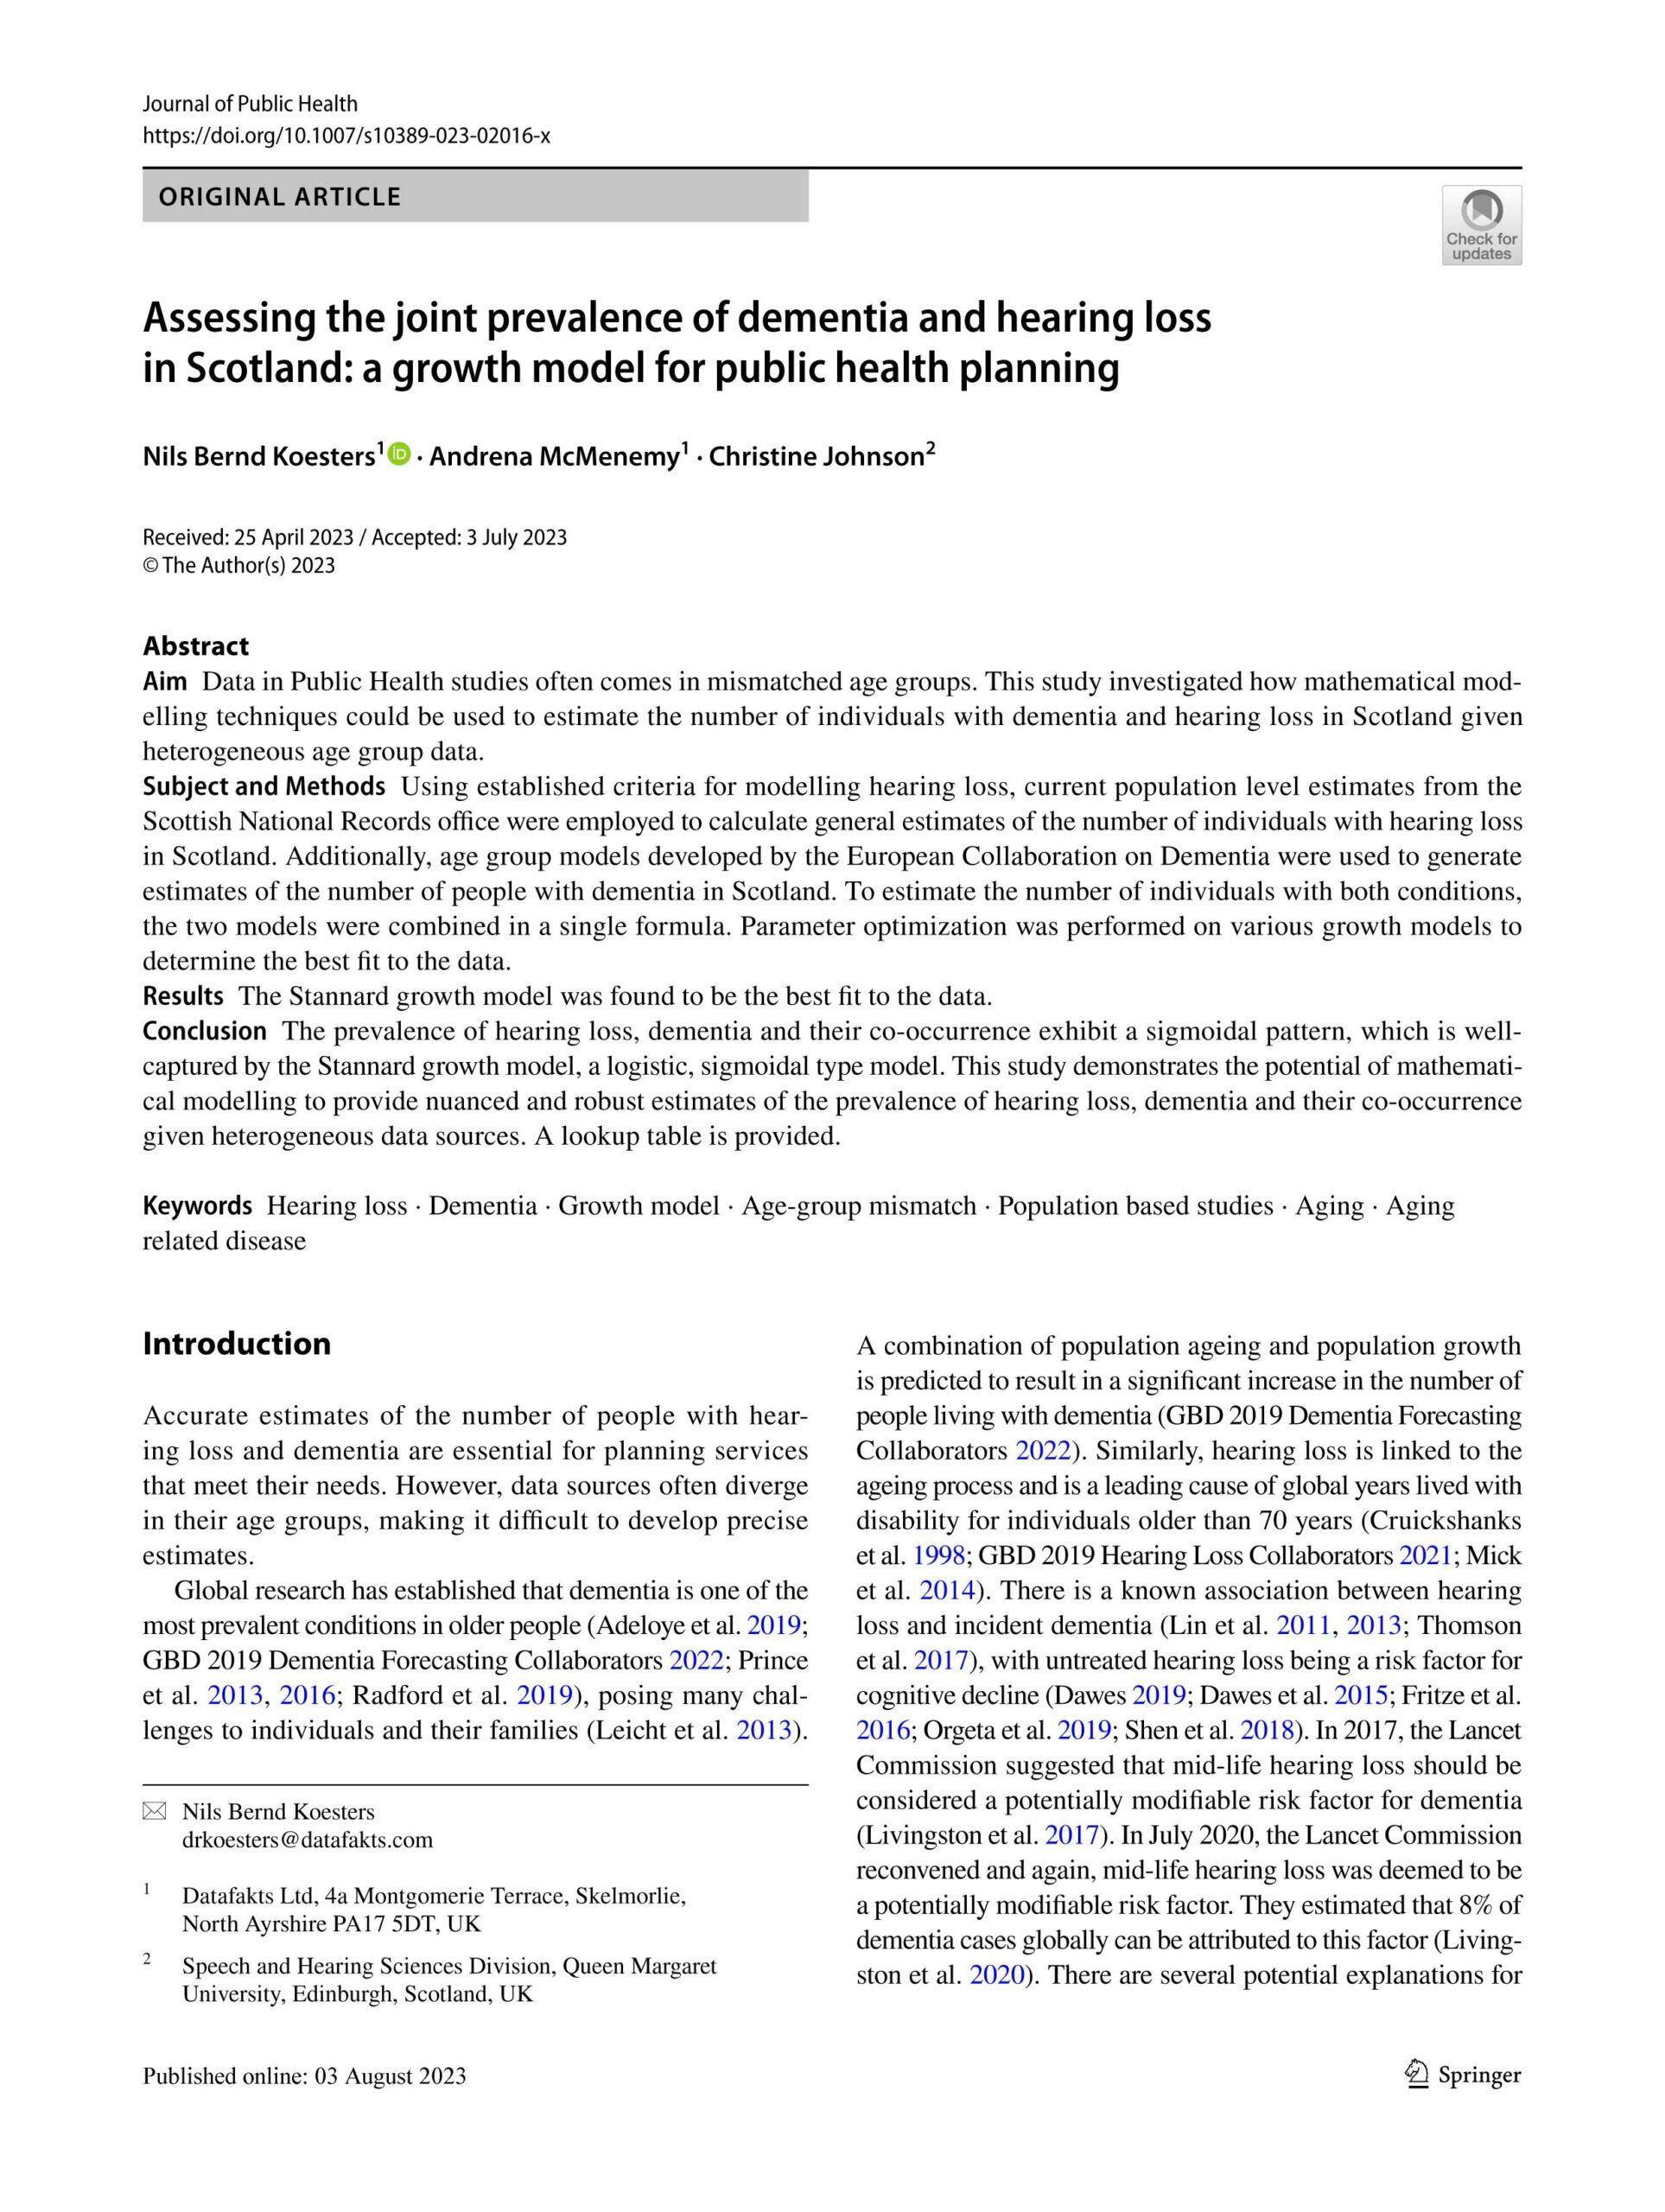 Assessing the joint prevalence of dementia and hearing loss in Scotland: a growth model for public health planning